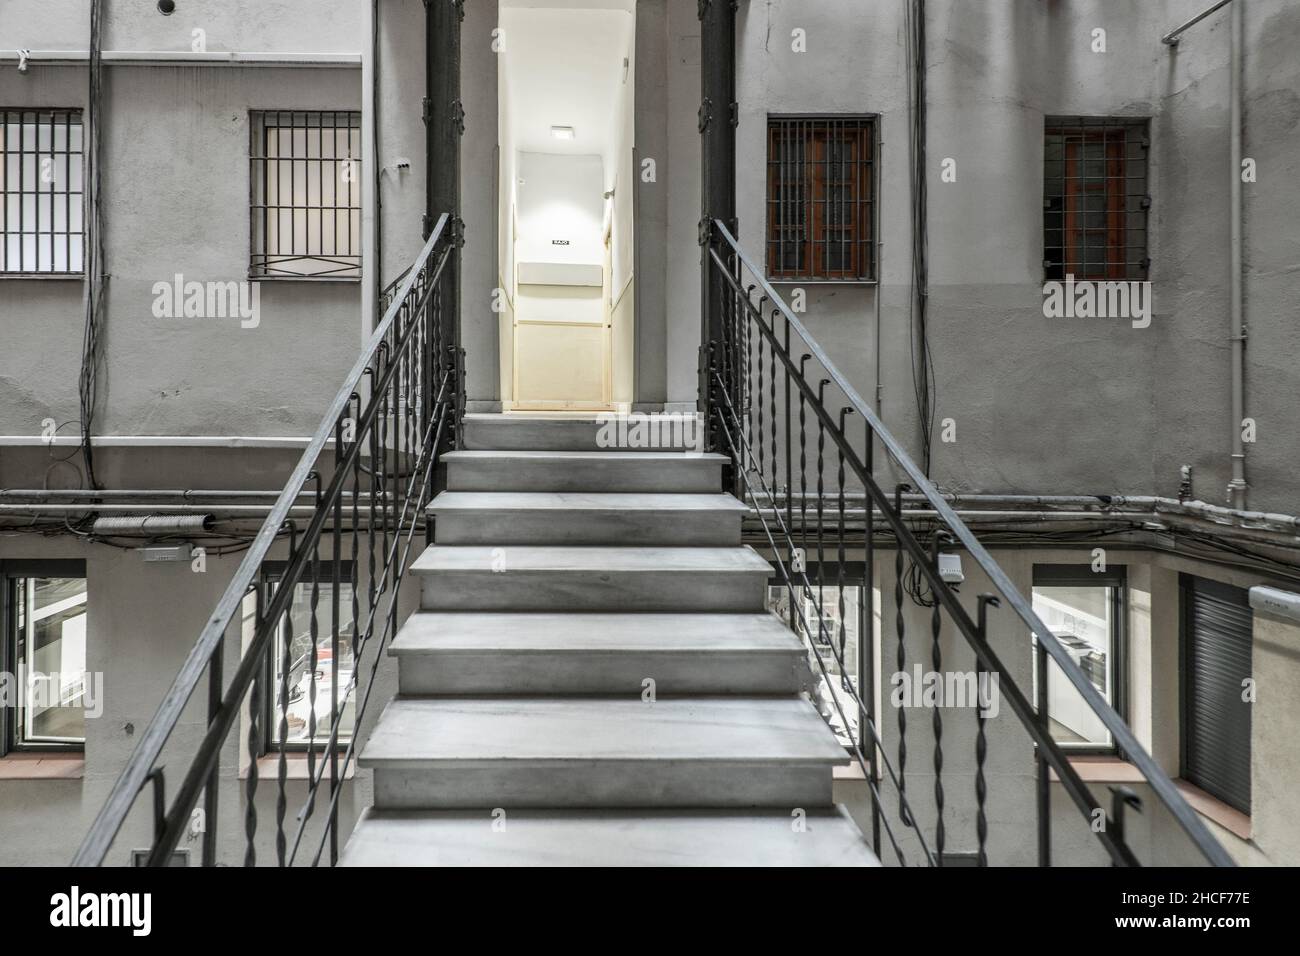 Interior stairs in the patio of lights of a vintage building Stock Photo